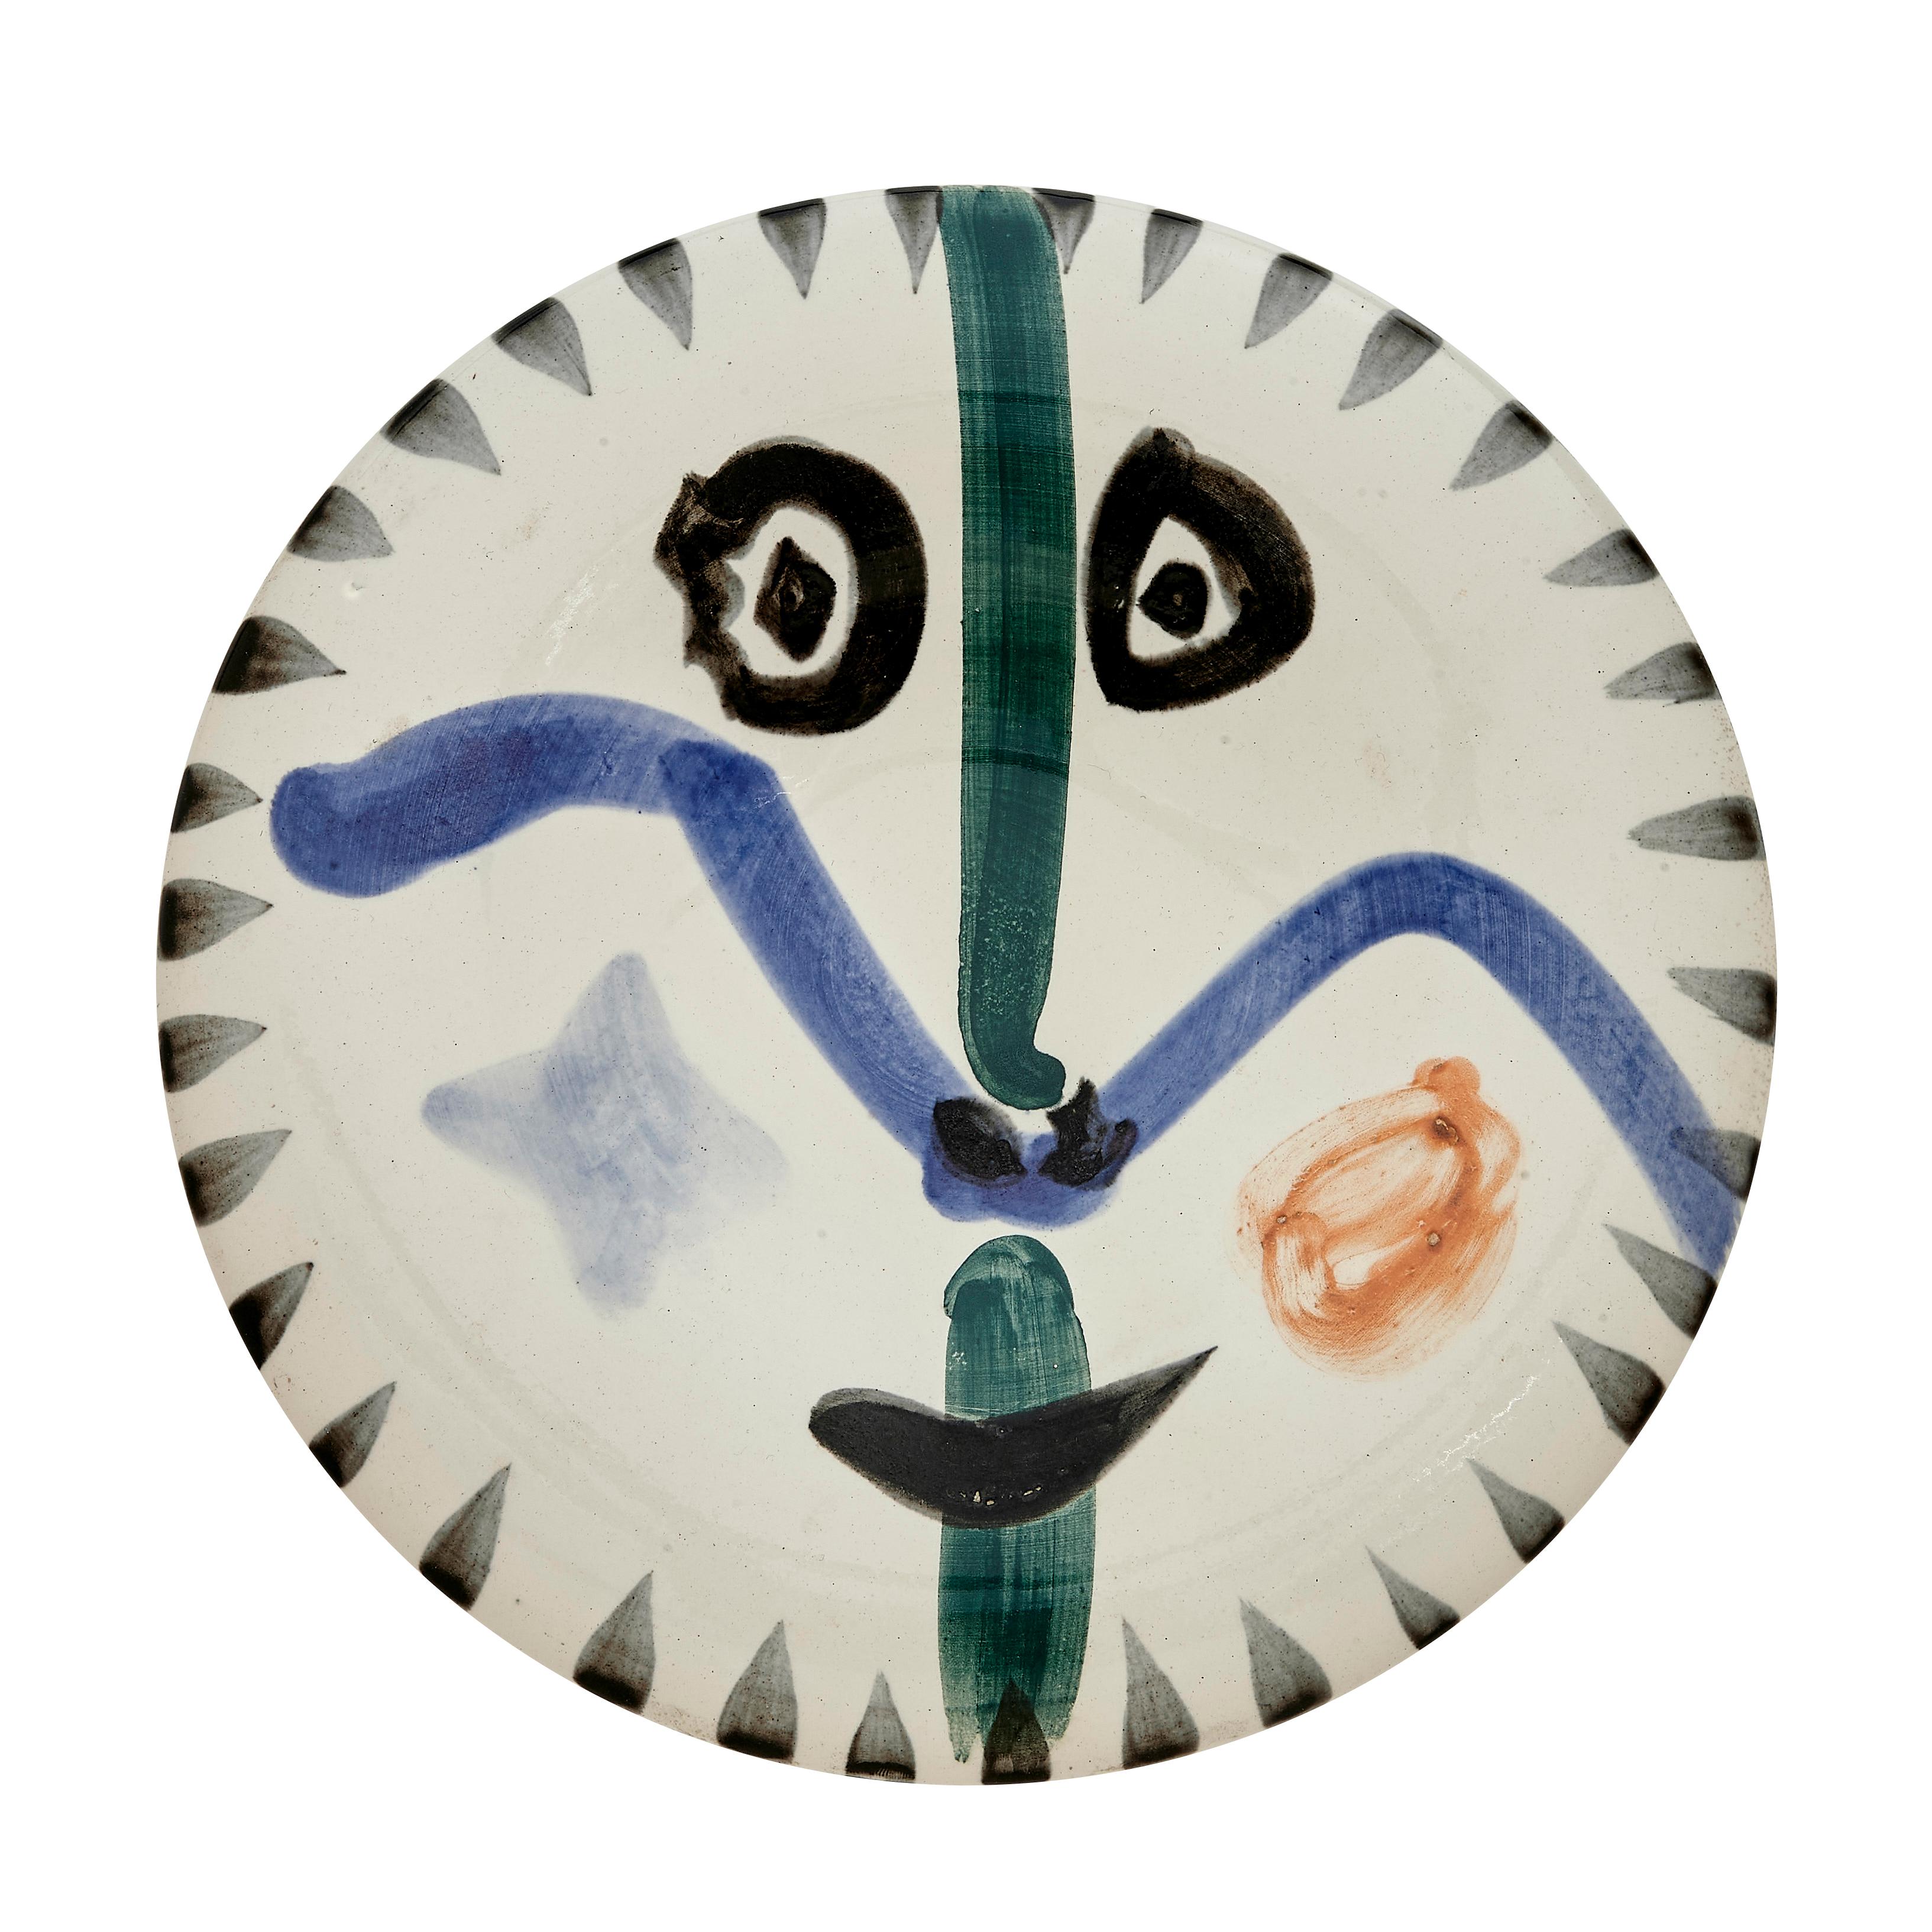 PABLO PICASSO (1881-1973) 
Visage No. 111 (A. R. 476) 

Terre de faïence plate, 1963, numbered 422/500, with the workshop numbering, inscribed 'Edition Picasso' and 'Madoura', glazed and painted.
